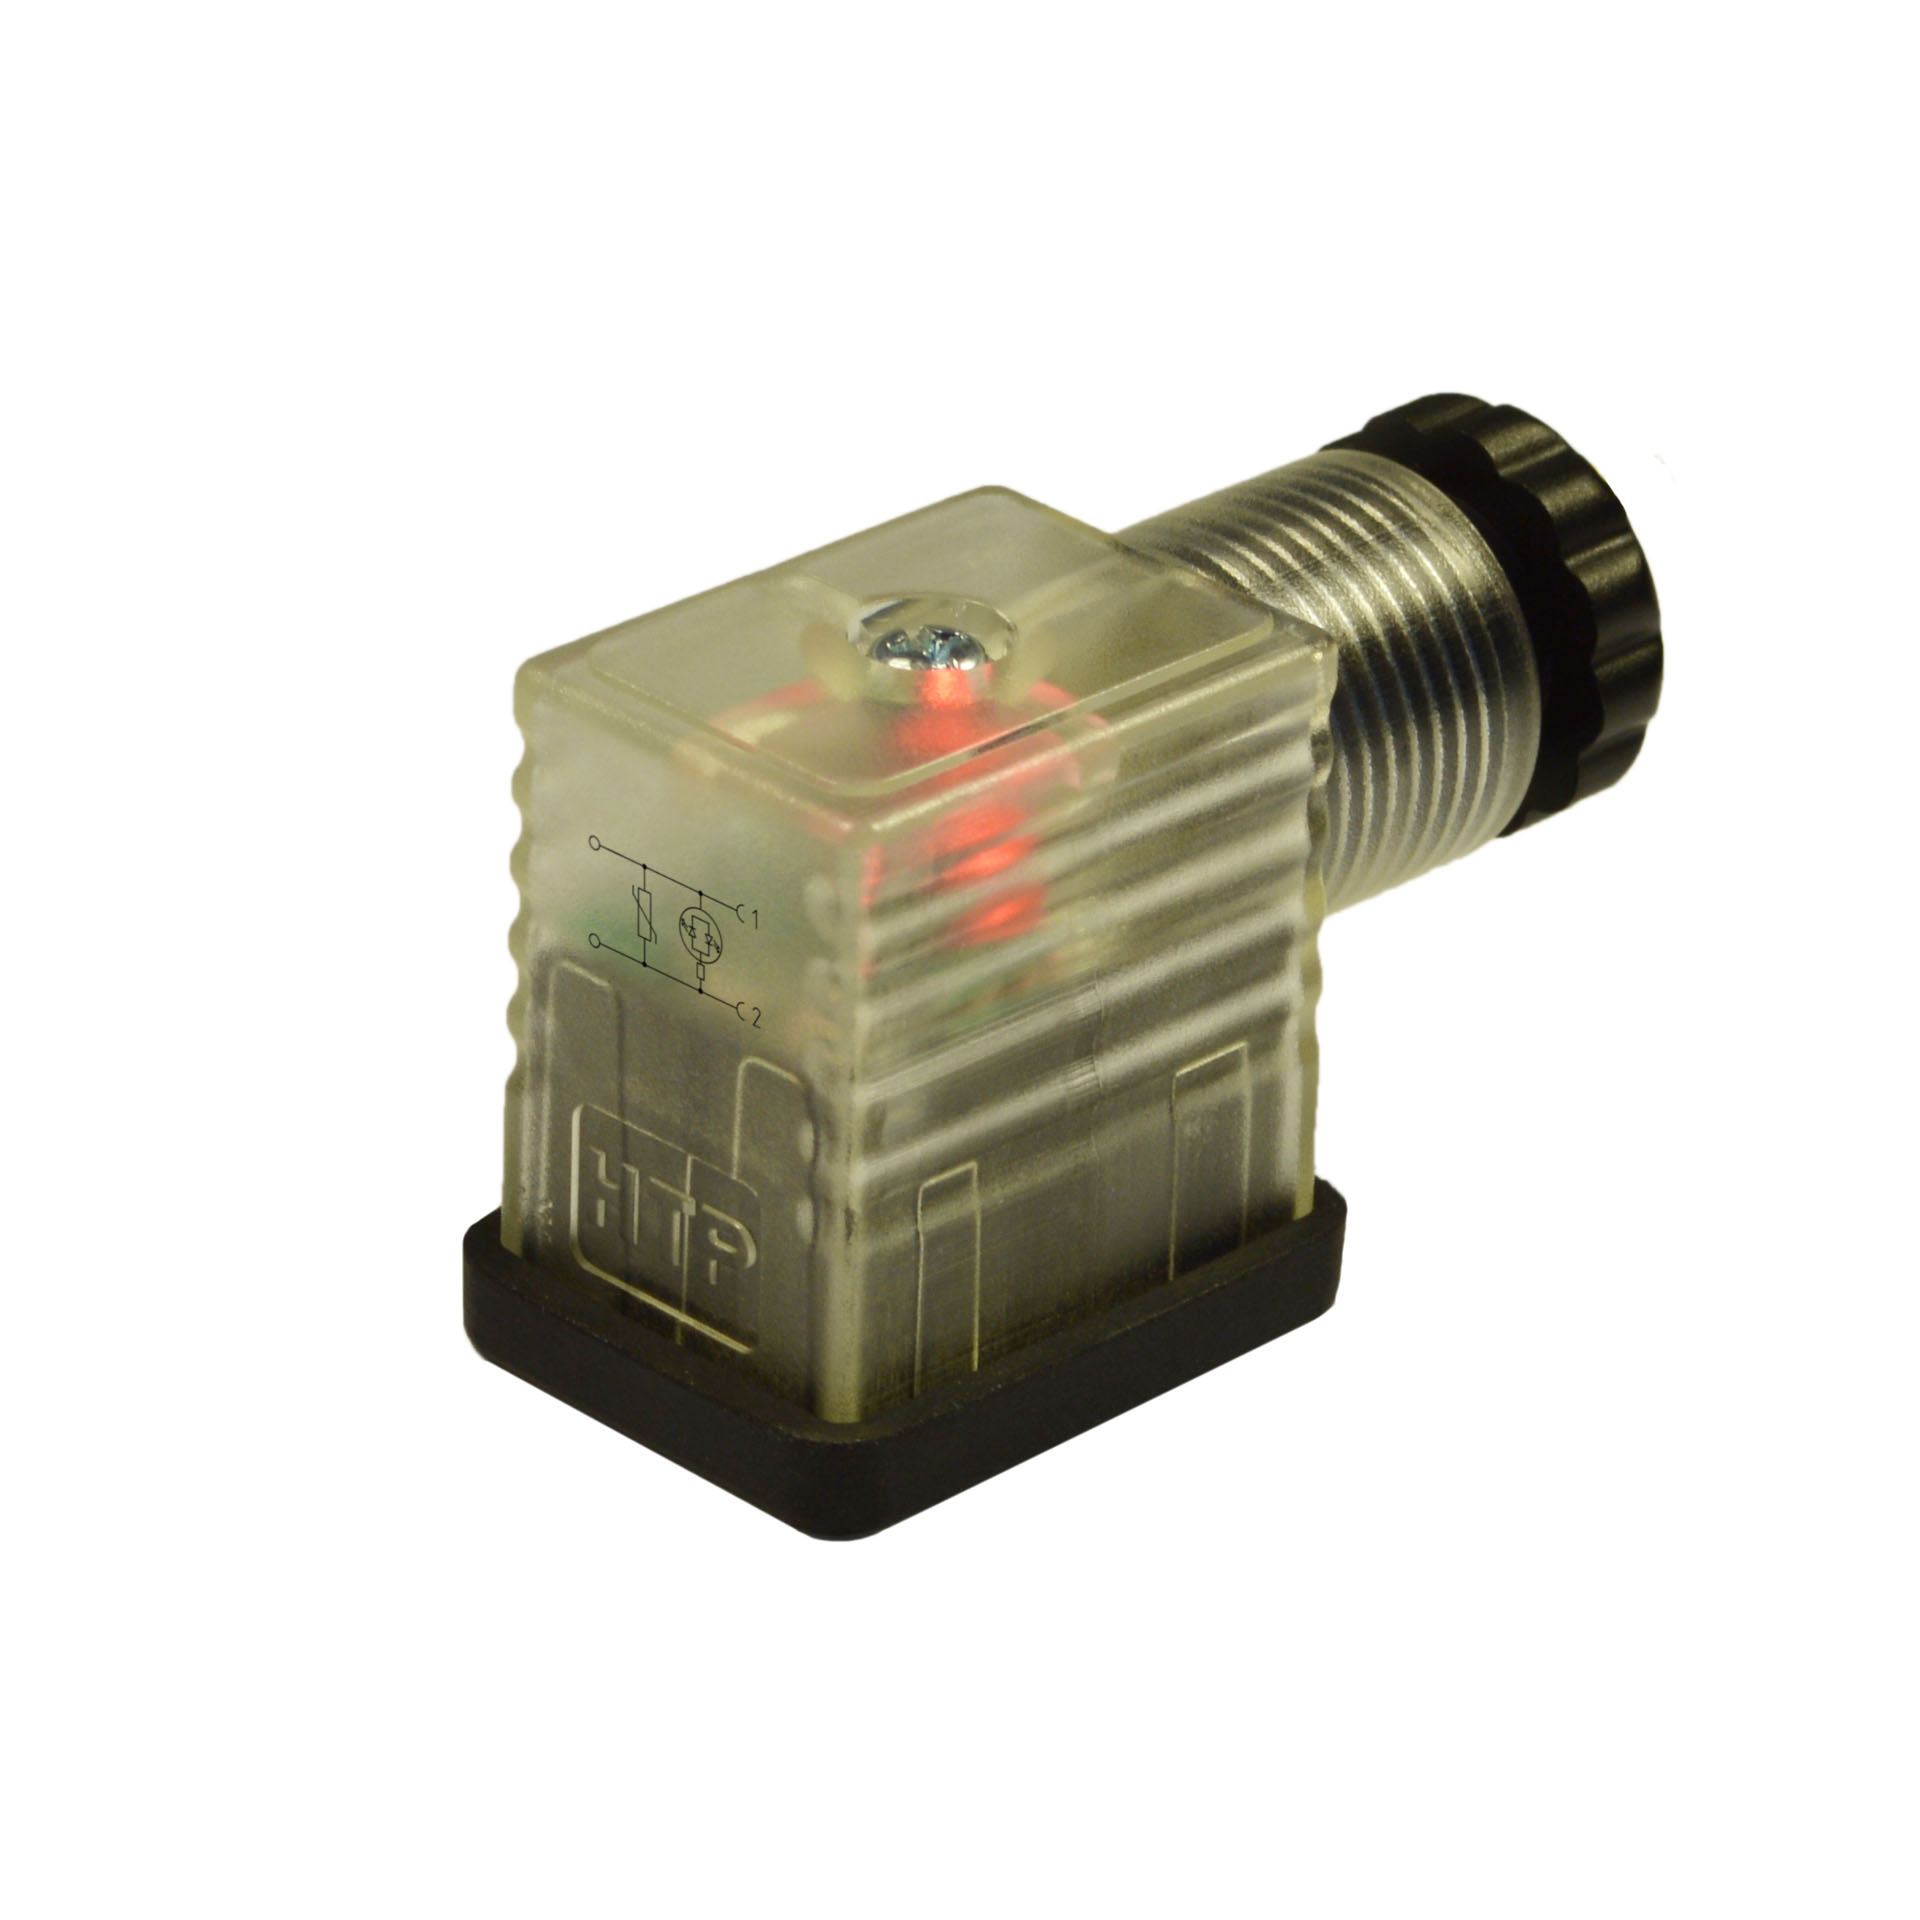 Industrial standard(typeB)field attachable,2p+PE(h.12),red LED+vdr,24VAC/DC,PG9